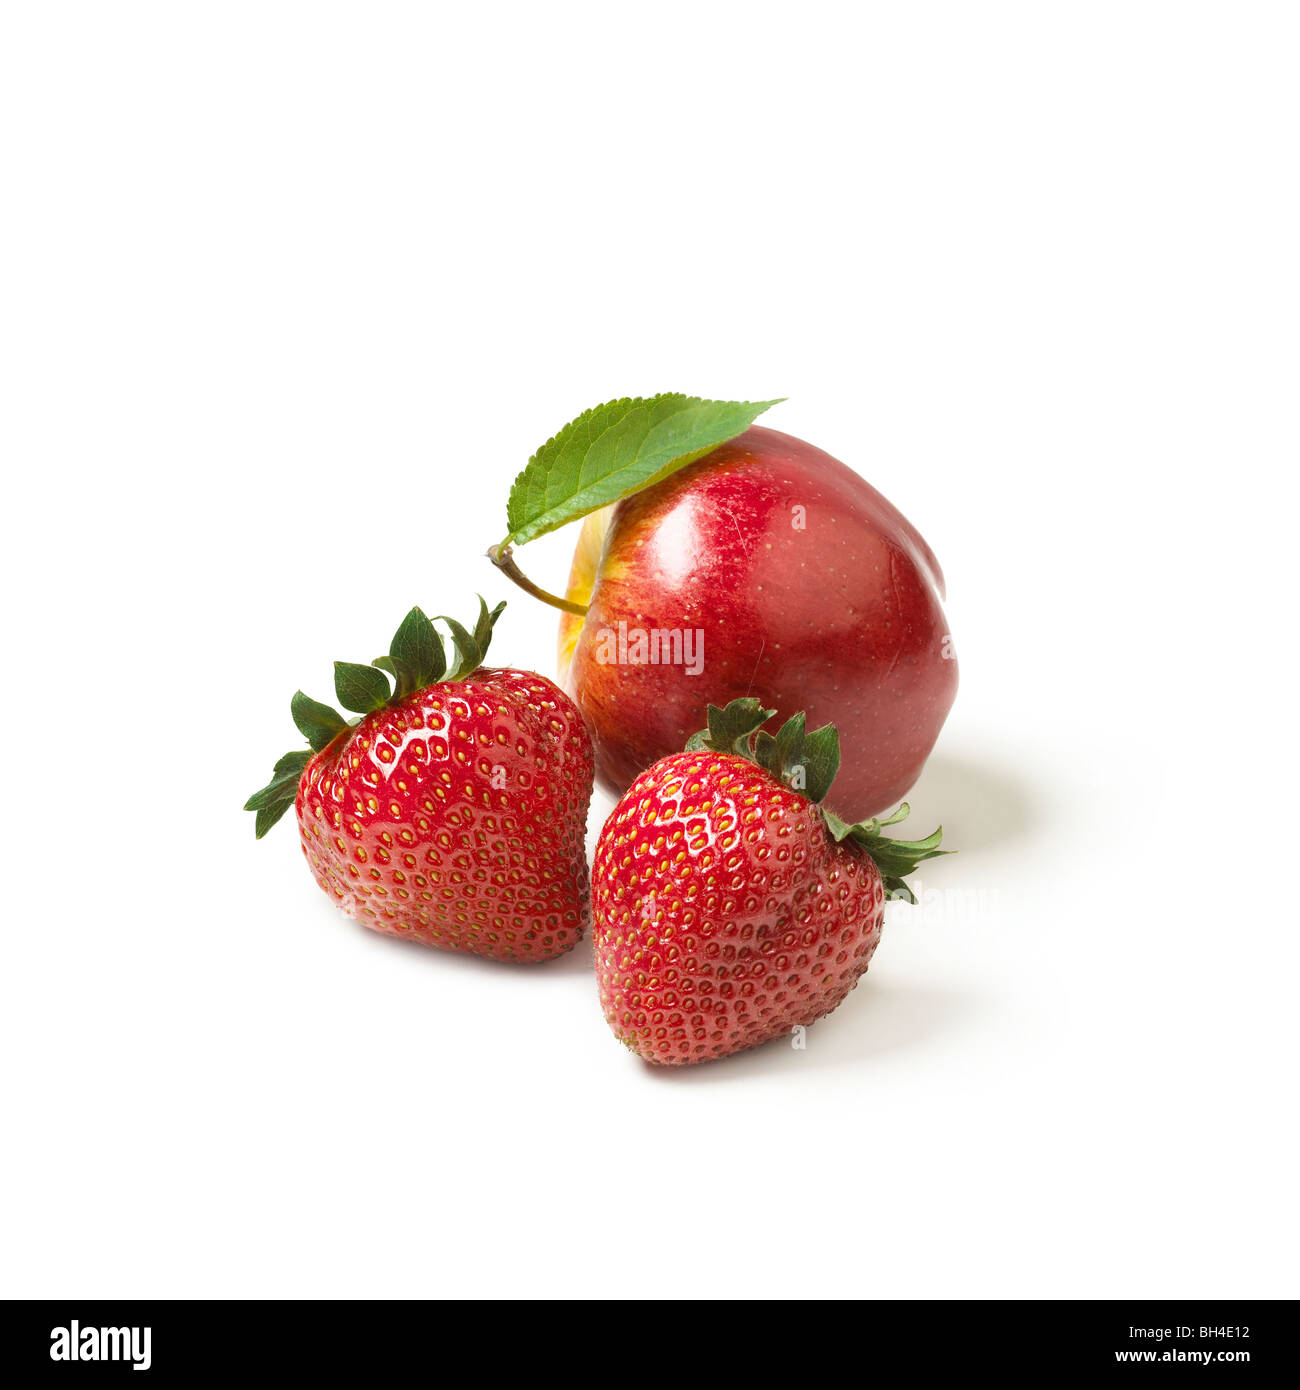 Strawberries and an apple on a white background Stock Photo